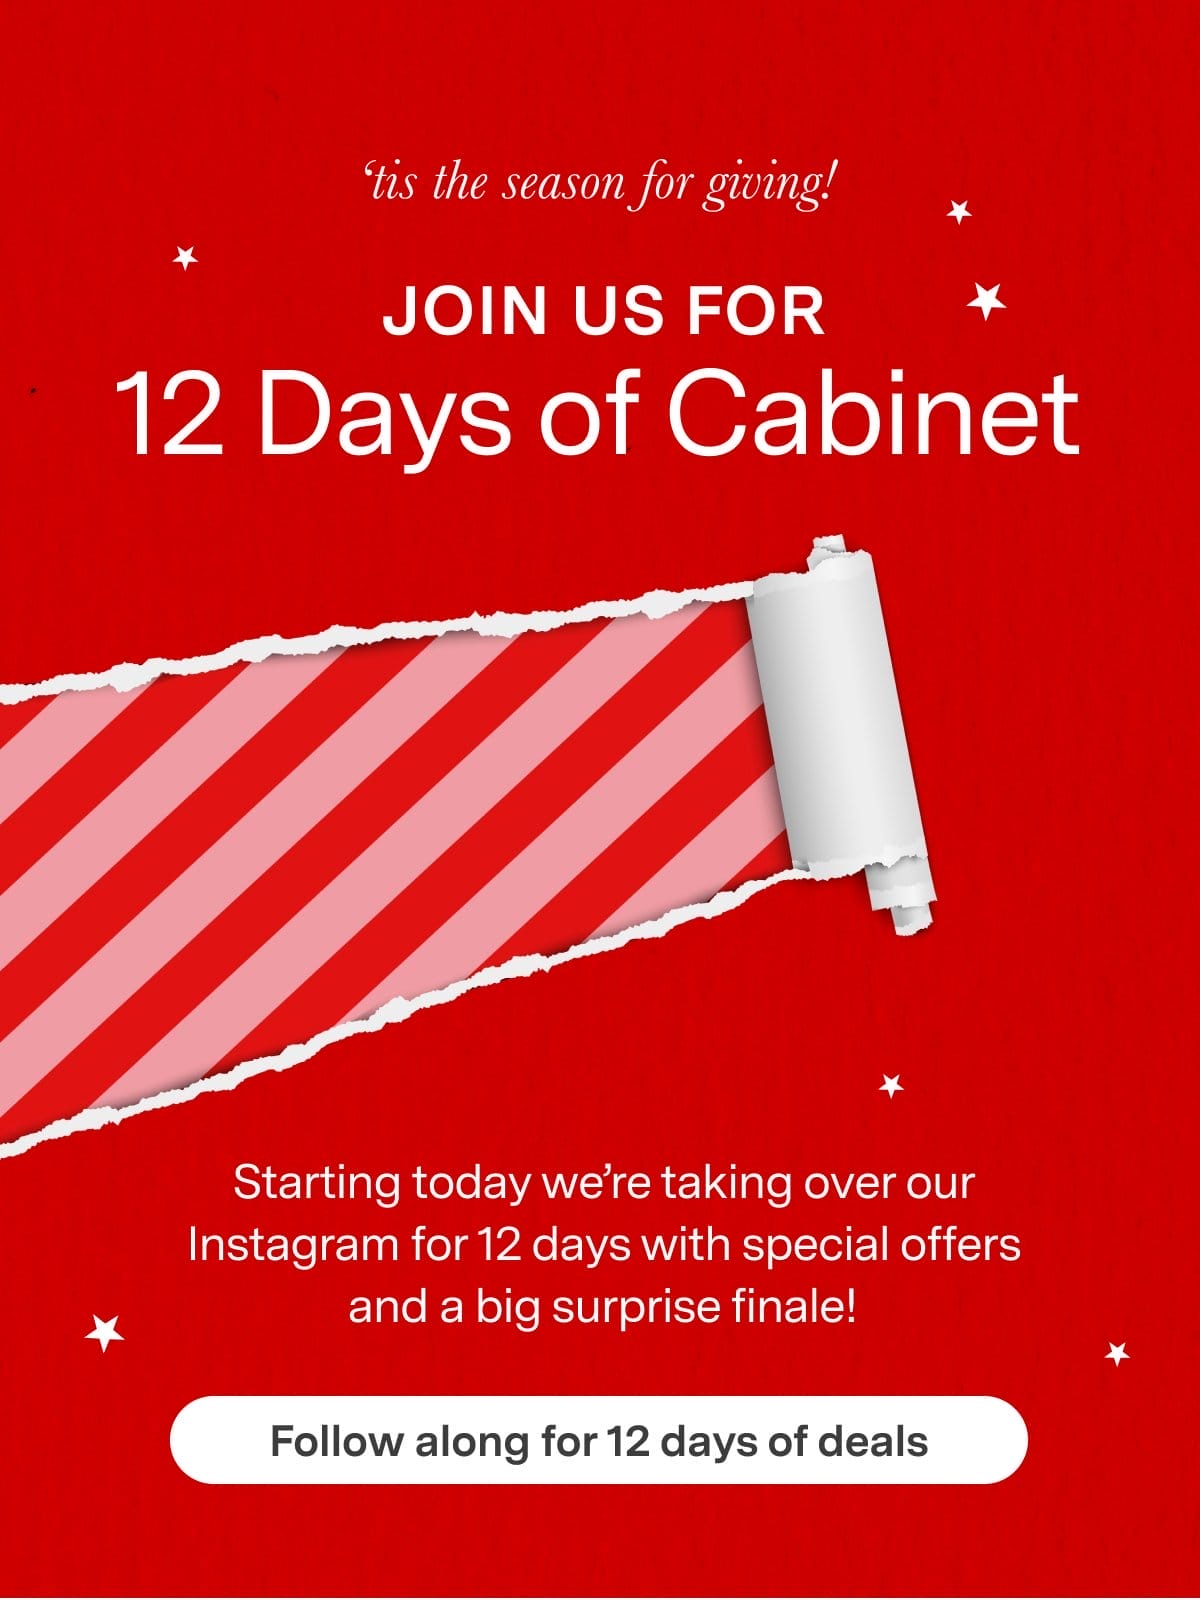 Join us for 12 Days of Cabinet! Starting today we're taking over our Instagram for 12 days with special offers and a big surprise finale. Follow along for 12 days of deals!